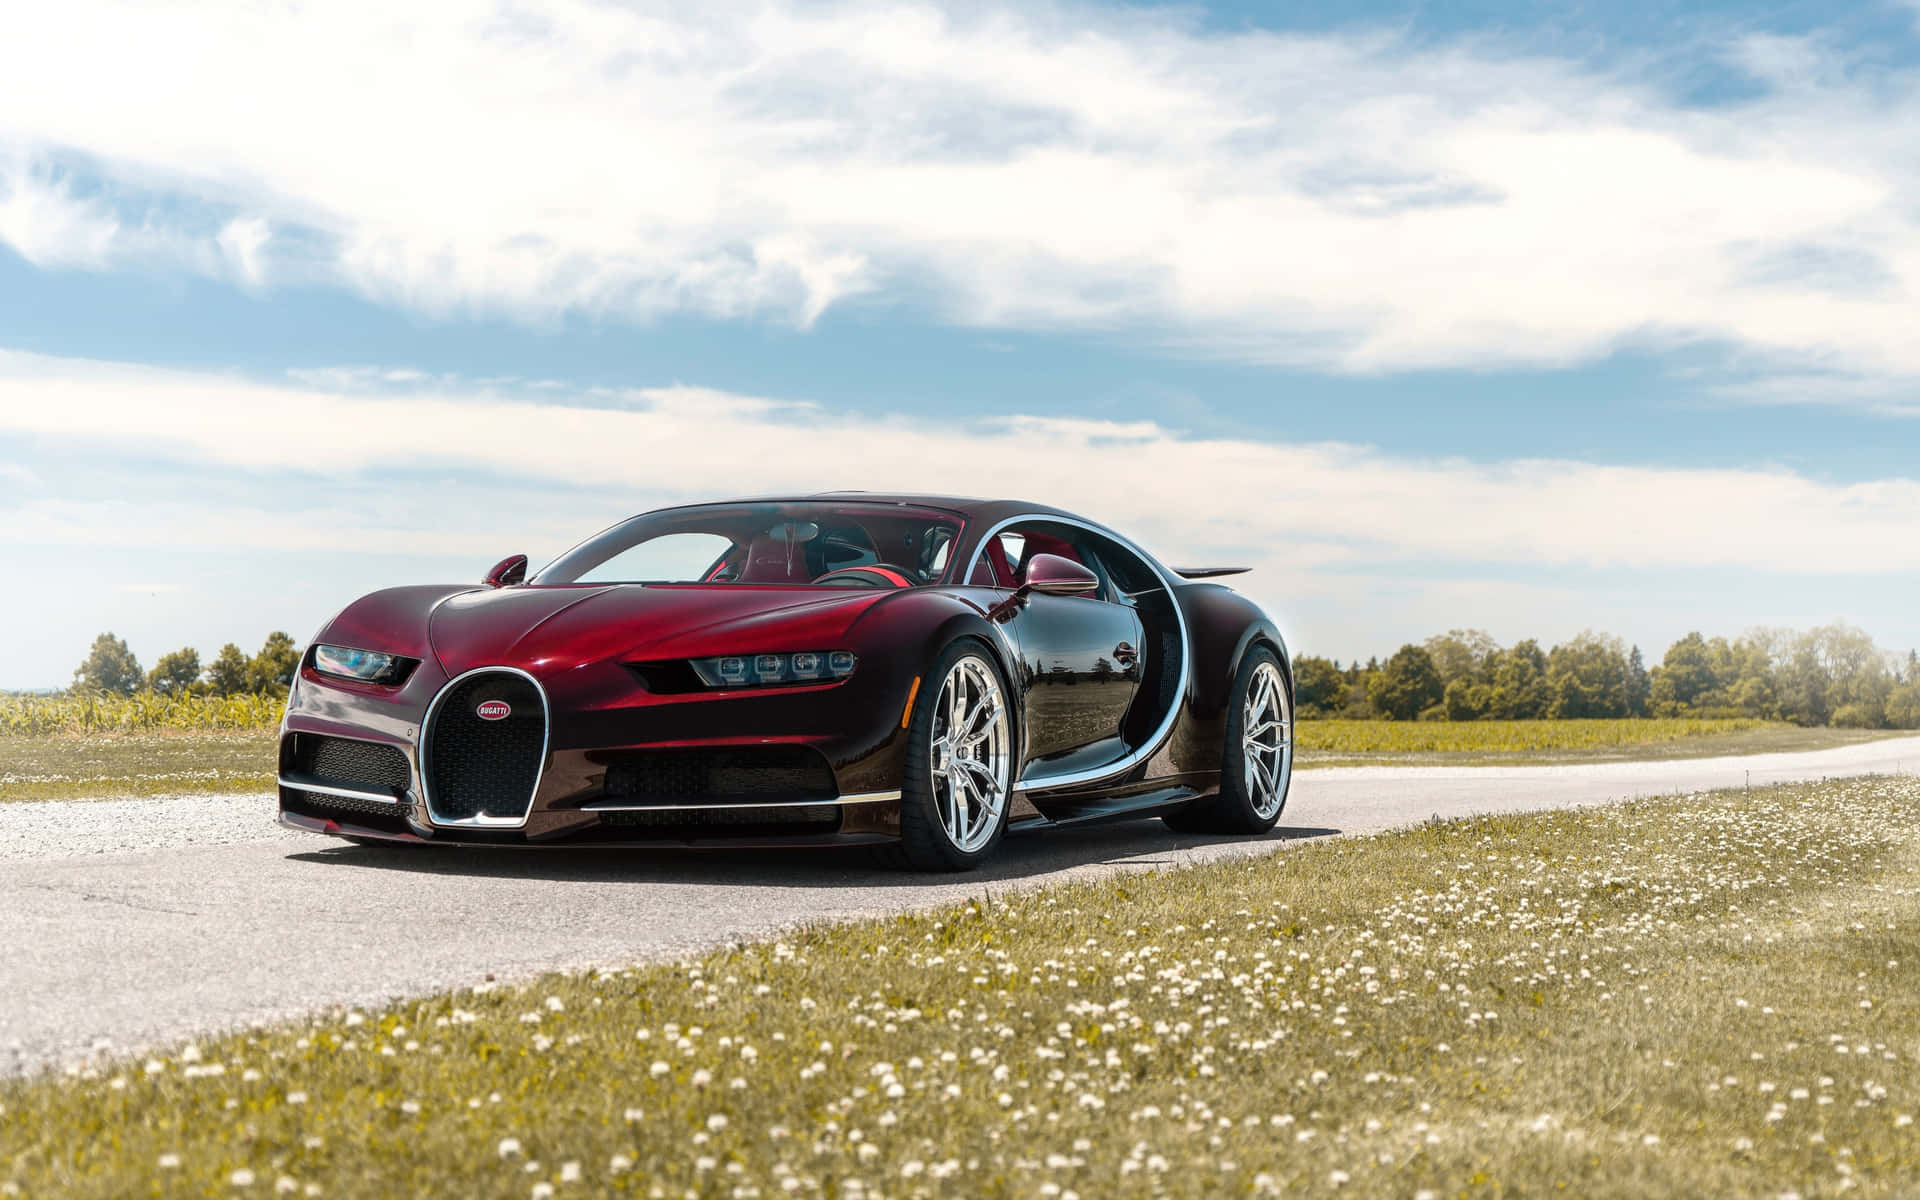 The Best Bugatti Car - Speed, Style and Luxury are All Combined